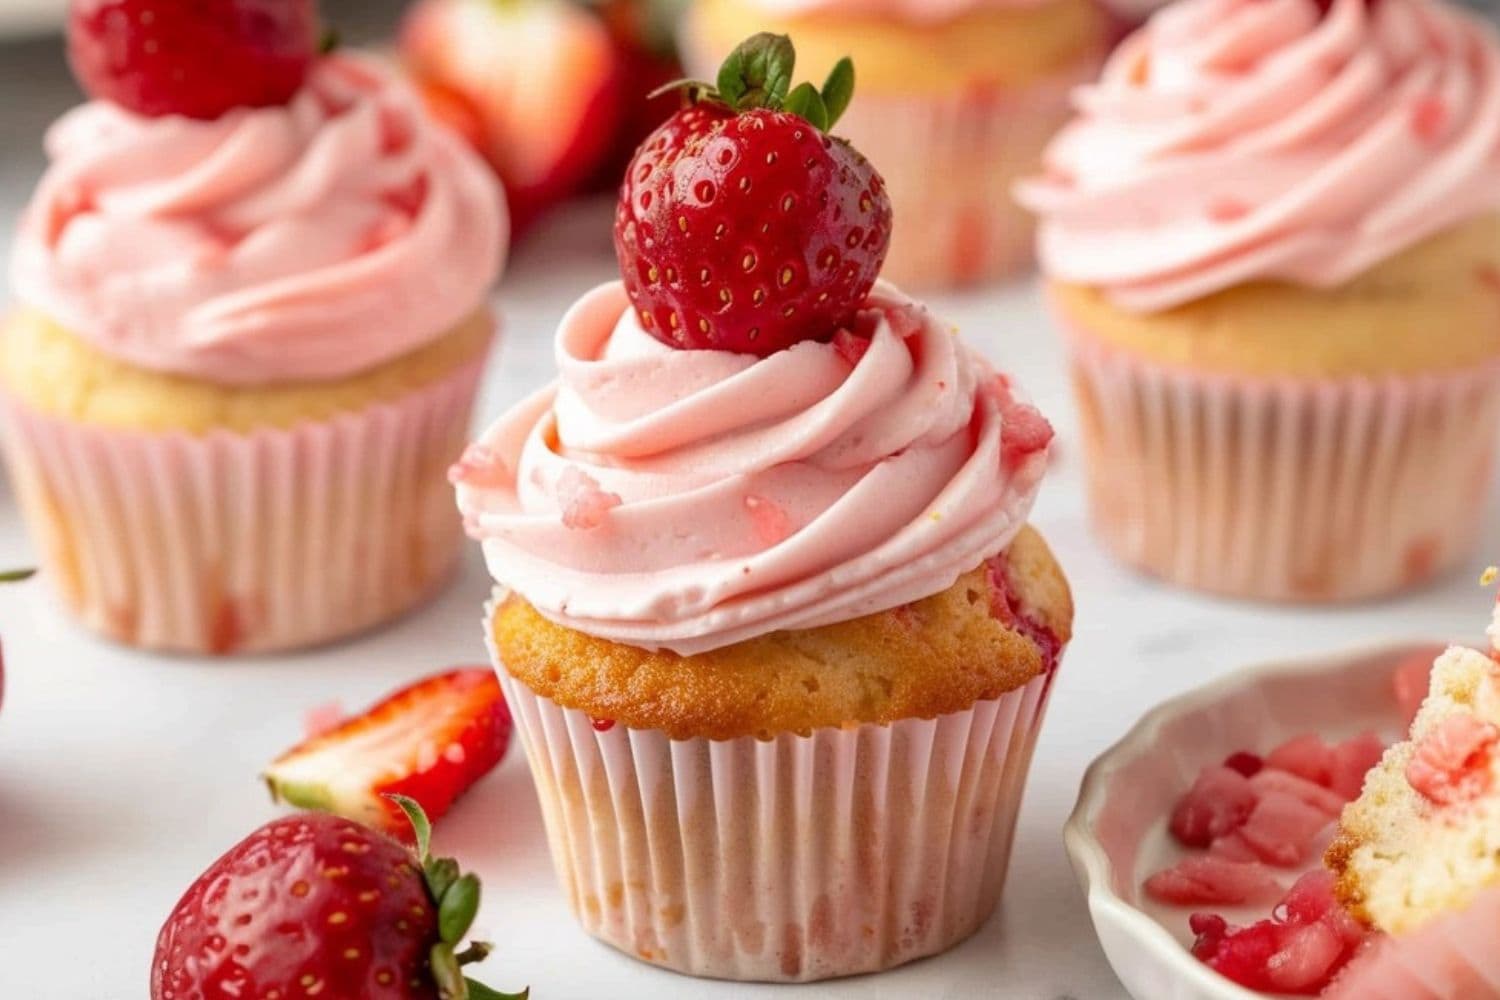 Strawberry cupcake with buttercream frosting garnished with chopped and sliced strawberries.